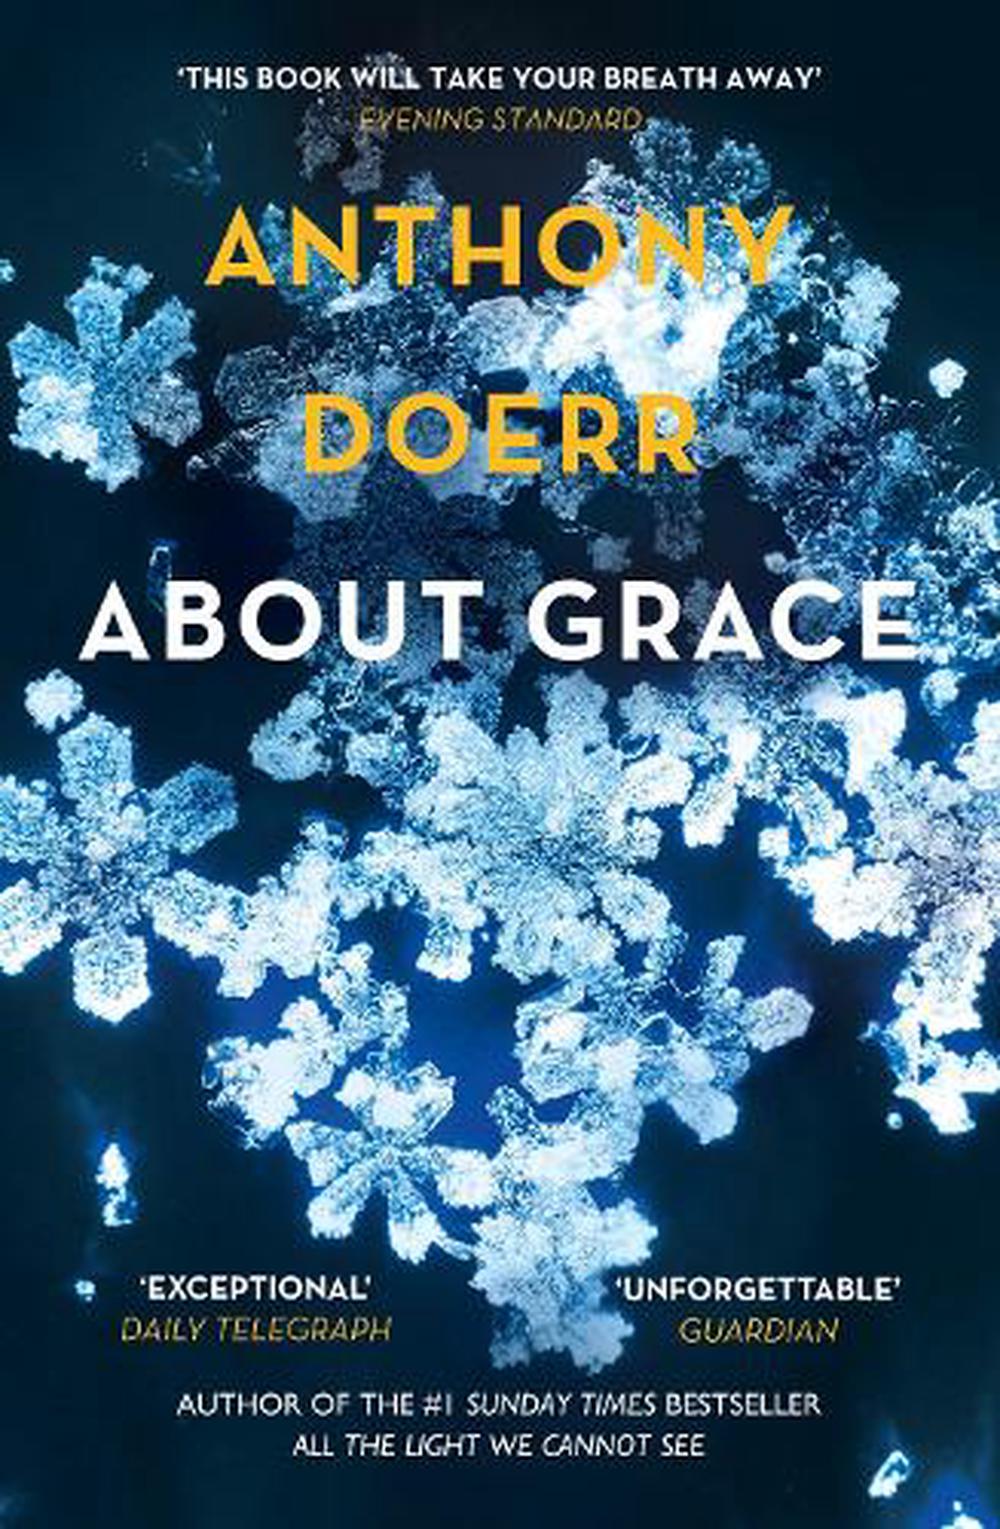 About　online　Paperback,　at　9780007146994　Grace　by　Nile　Anthony　Doerr,　Buy　The